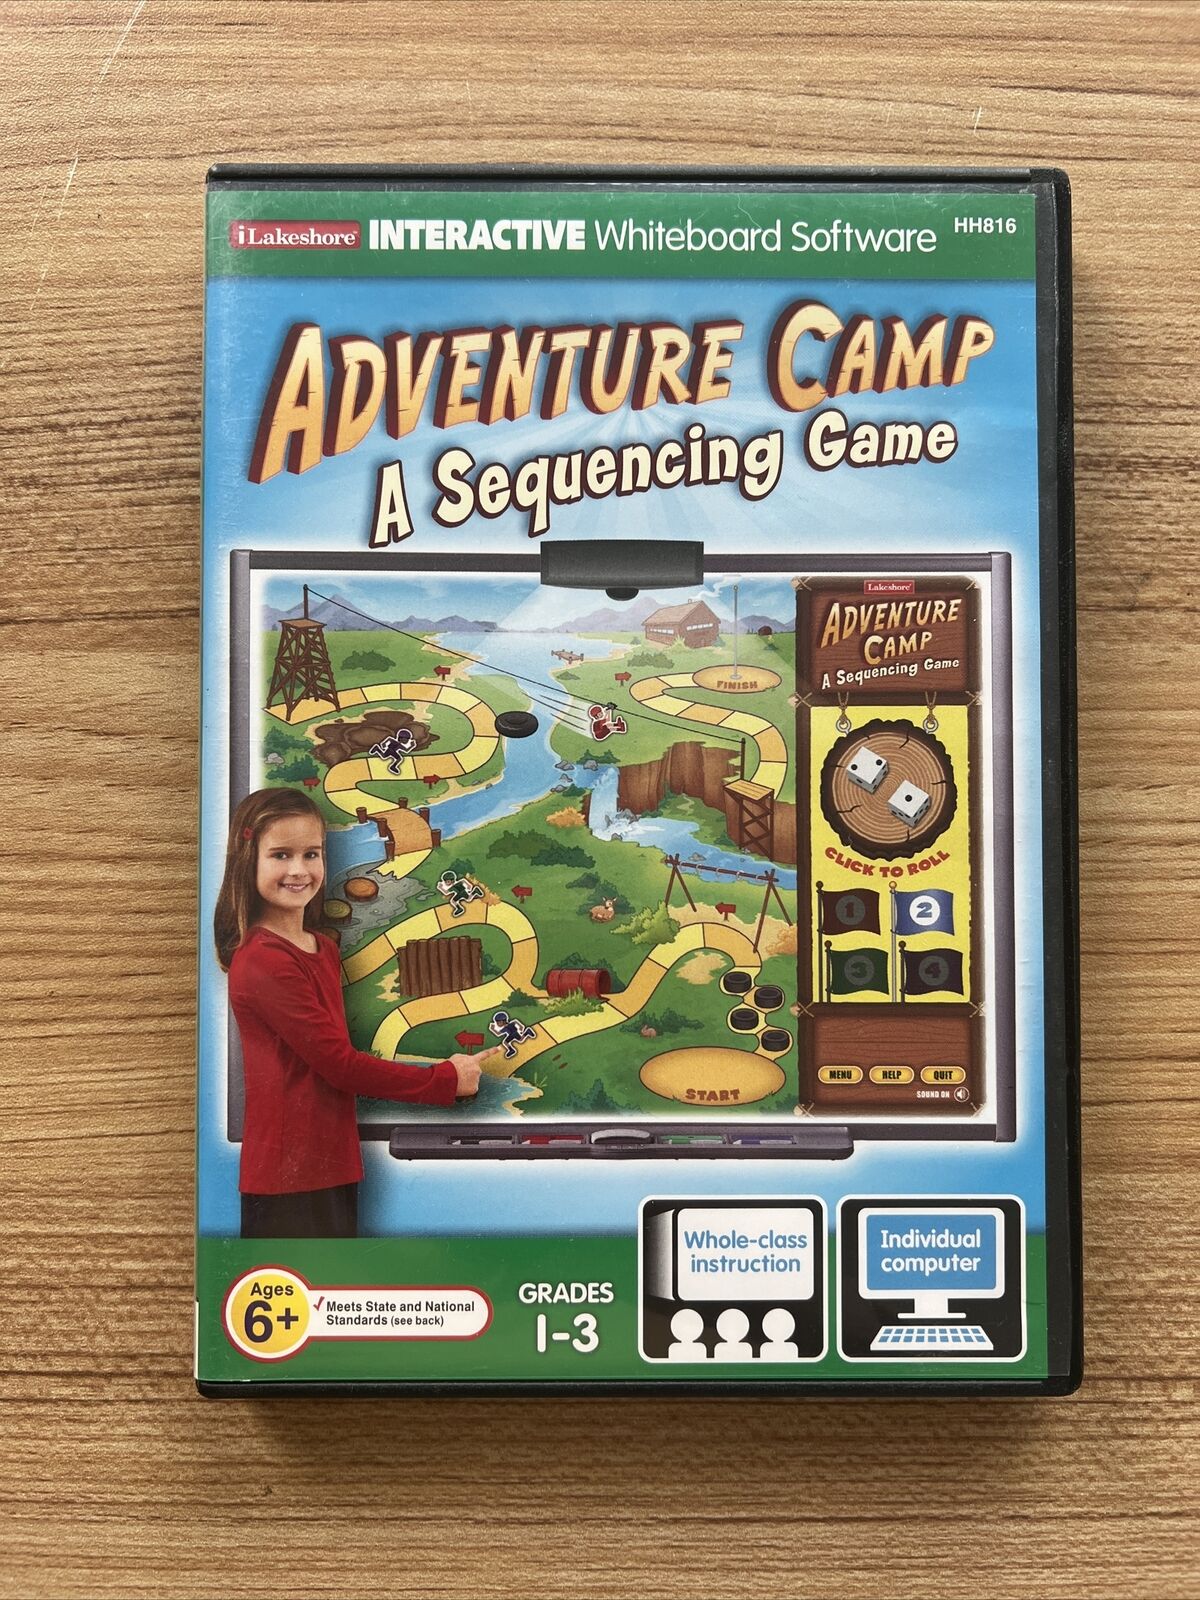 Adventure Camp: A Sequencing Game (Lakeshore Interactive Whiteboard Software CD)